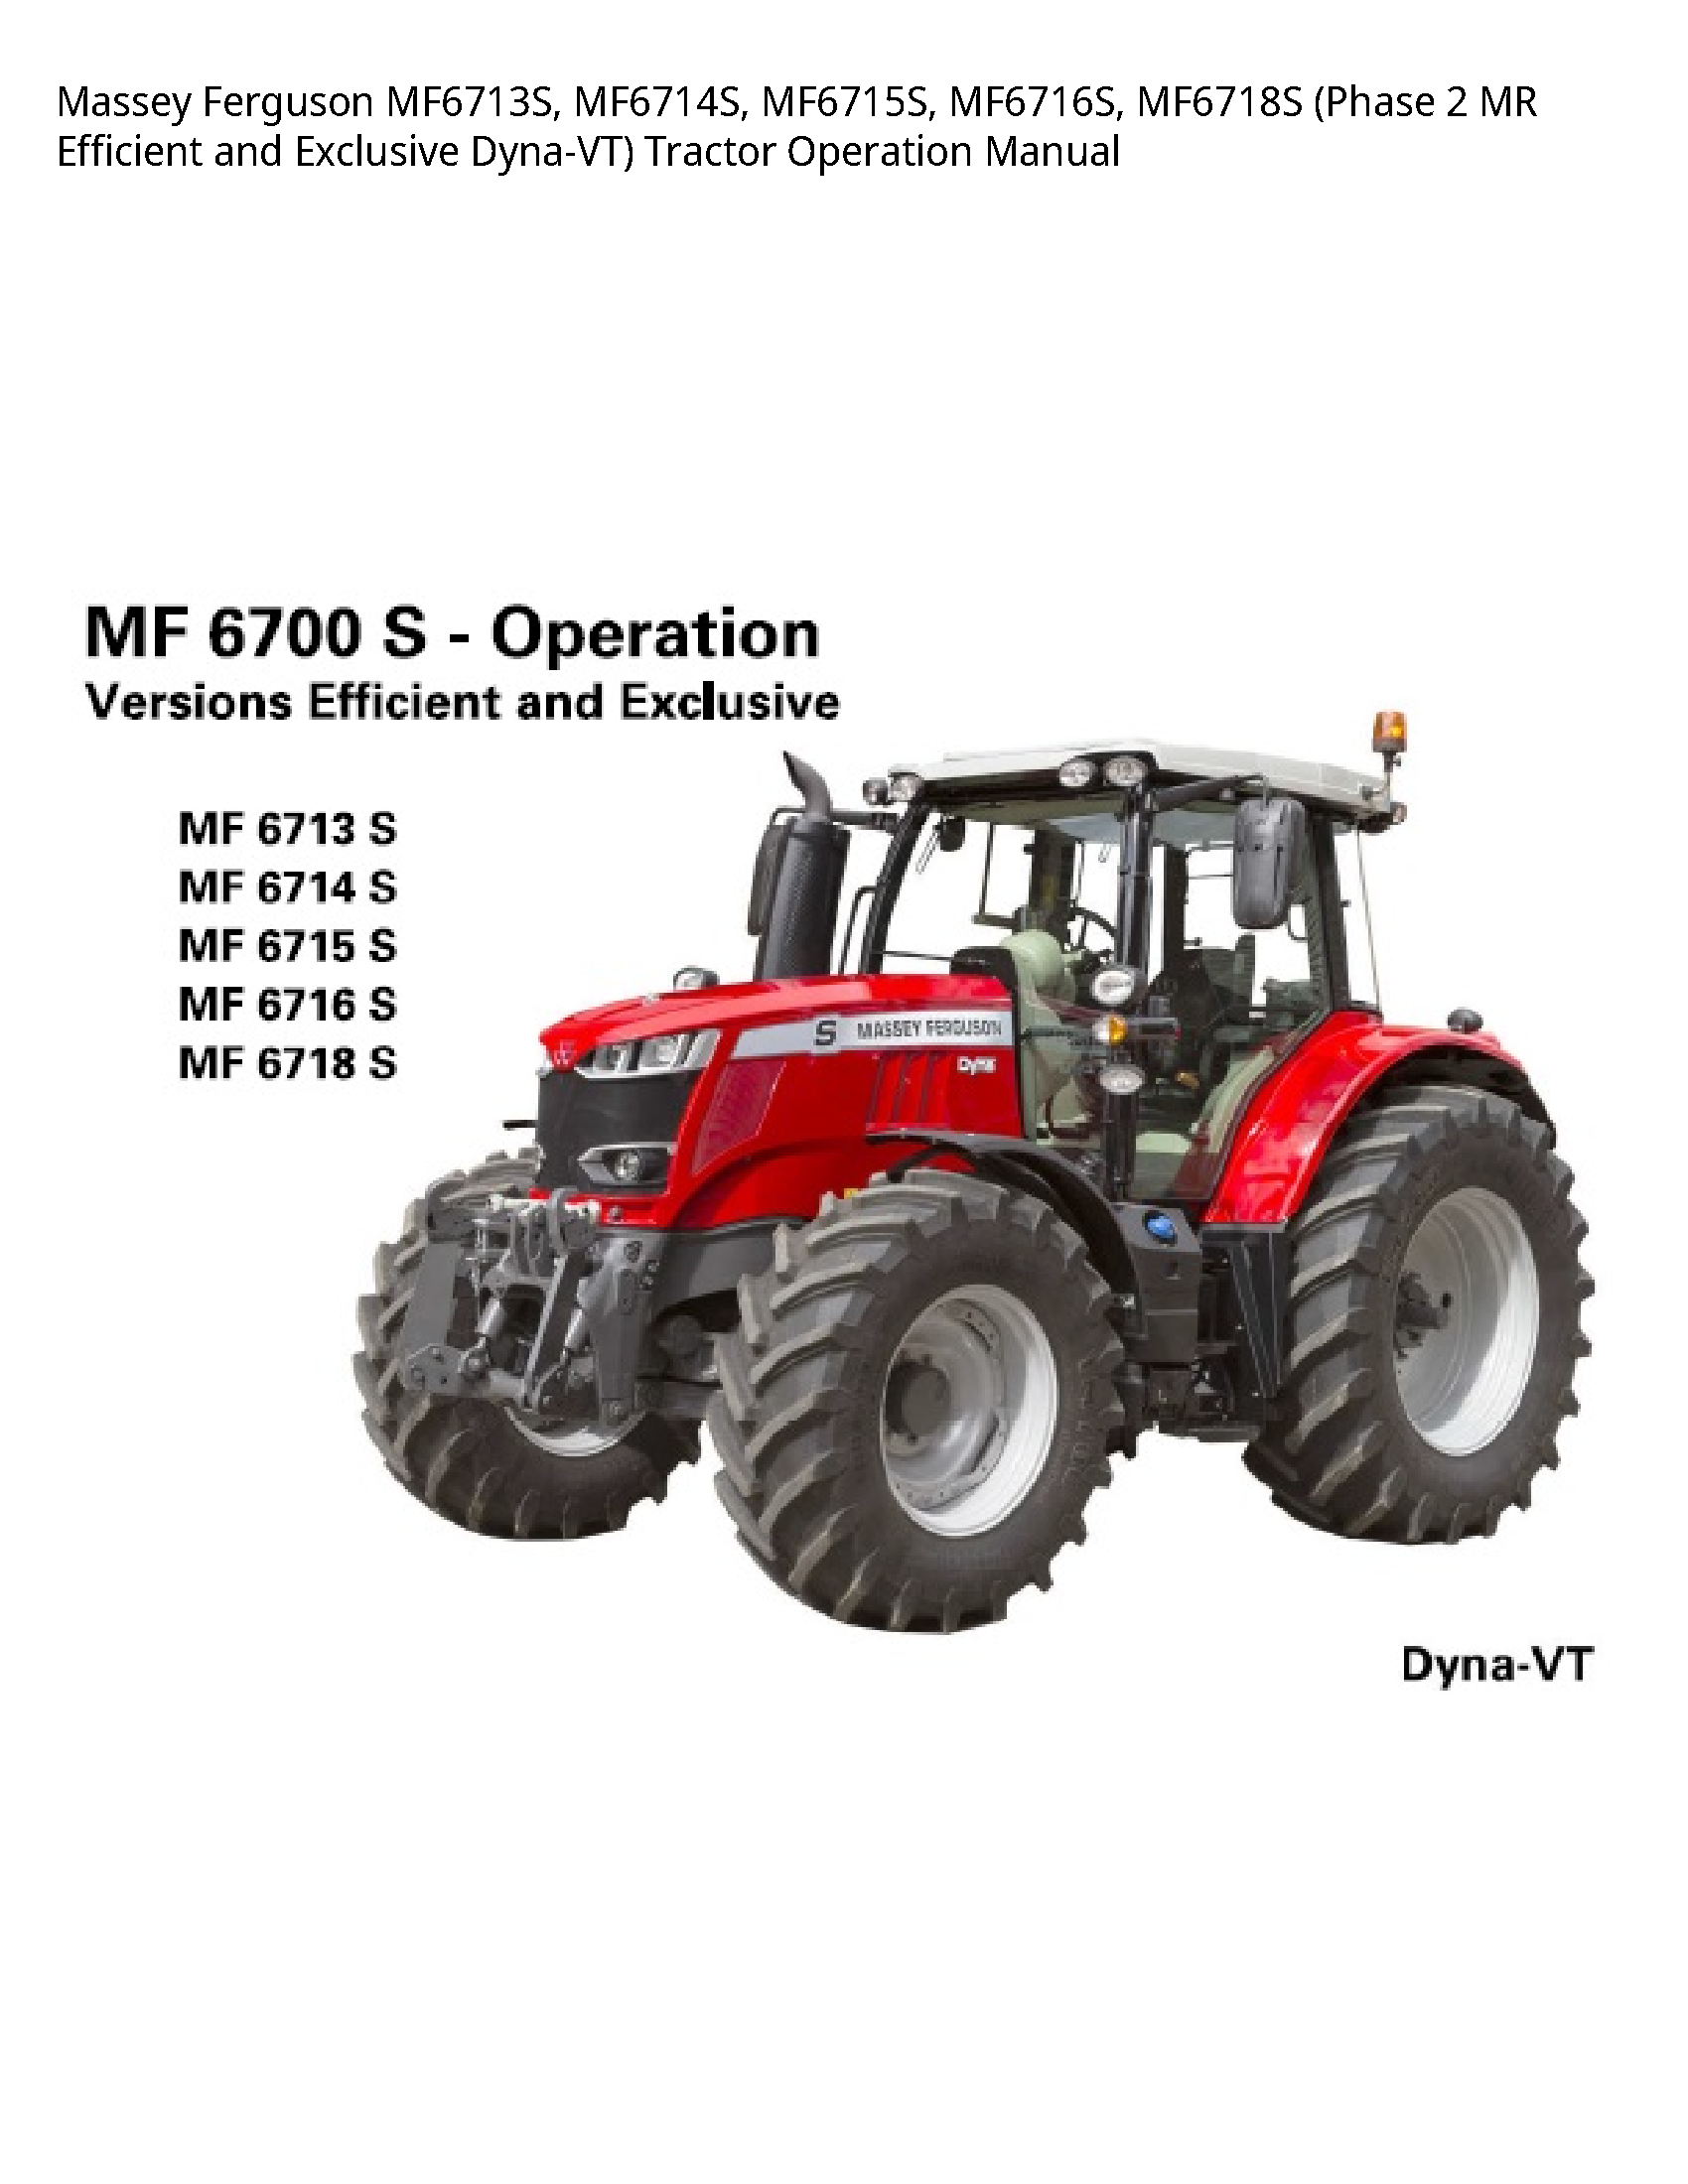 Massey Ferguson MF6713S (Phase MR Efficient  Exclusive Dyna-VT) Tractor Operation manual